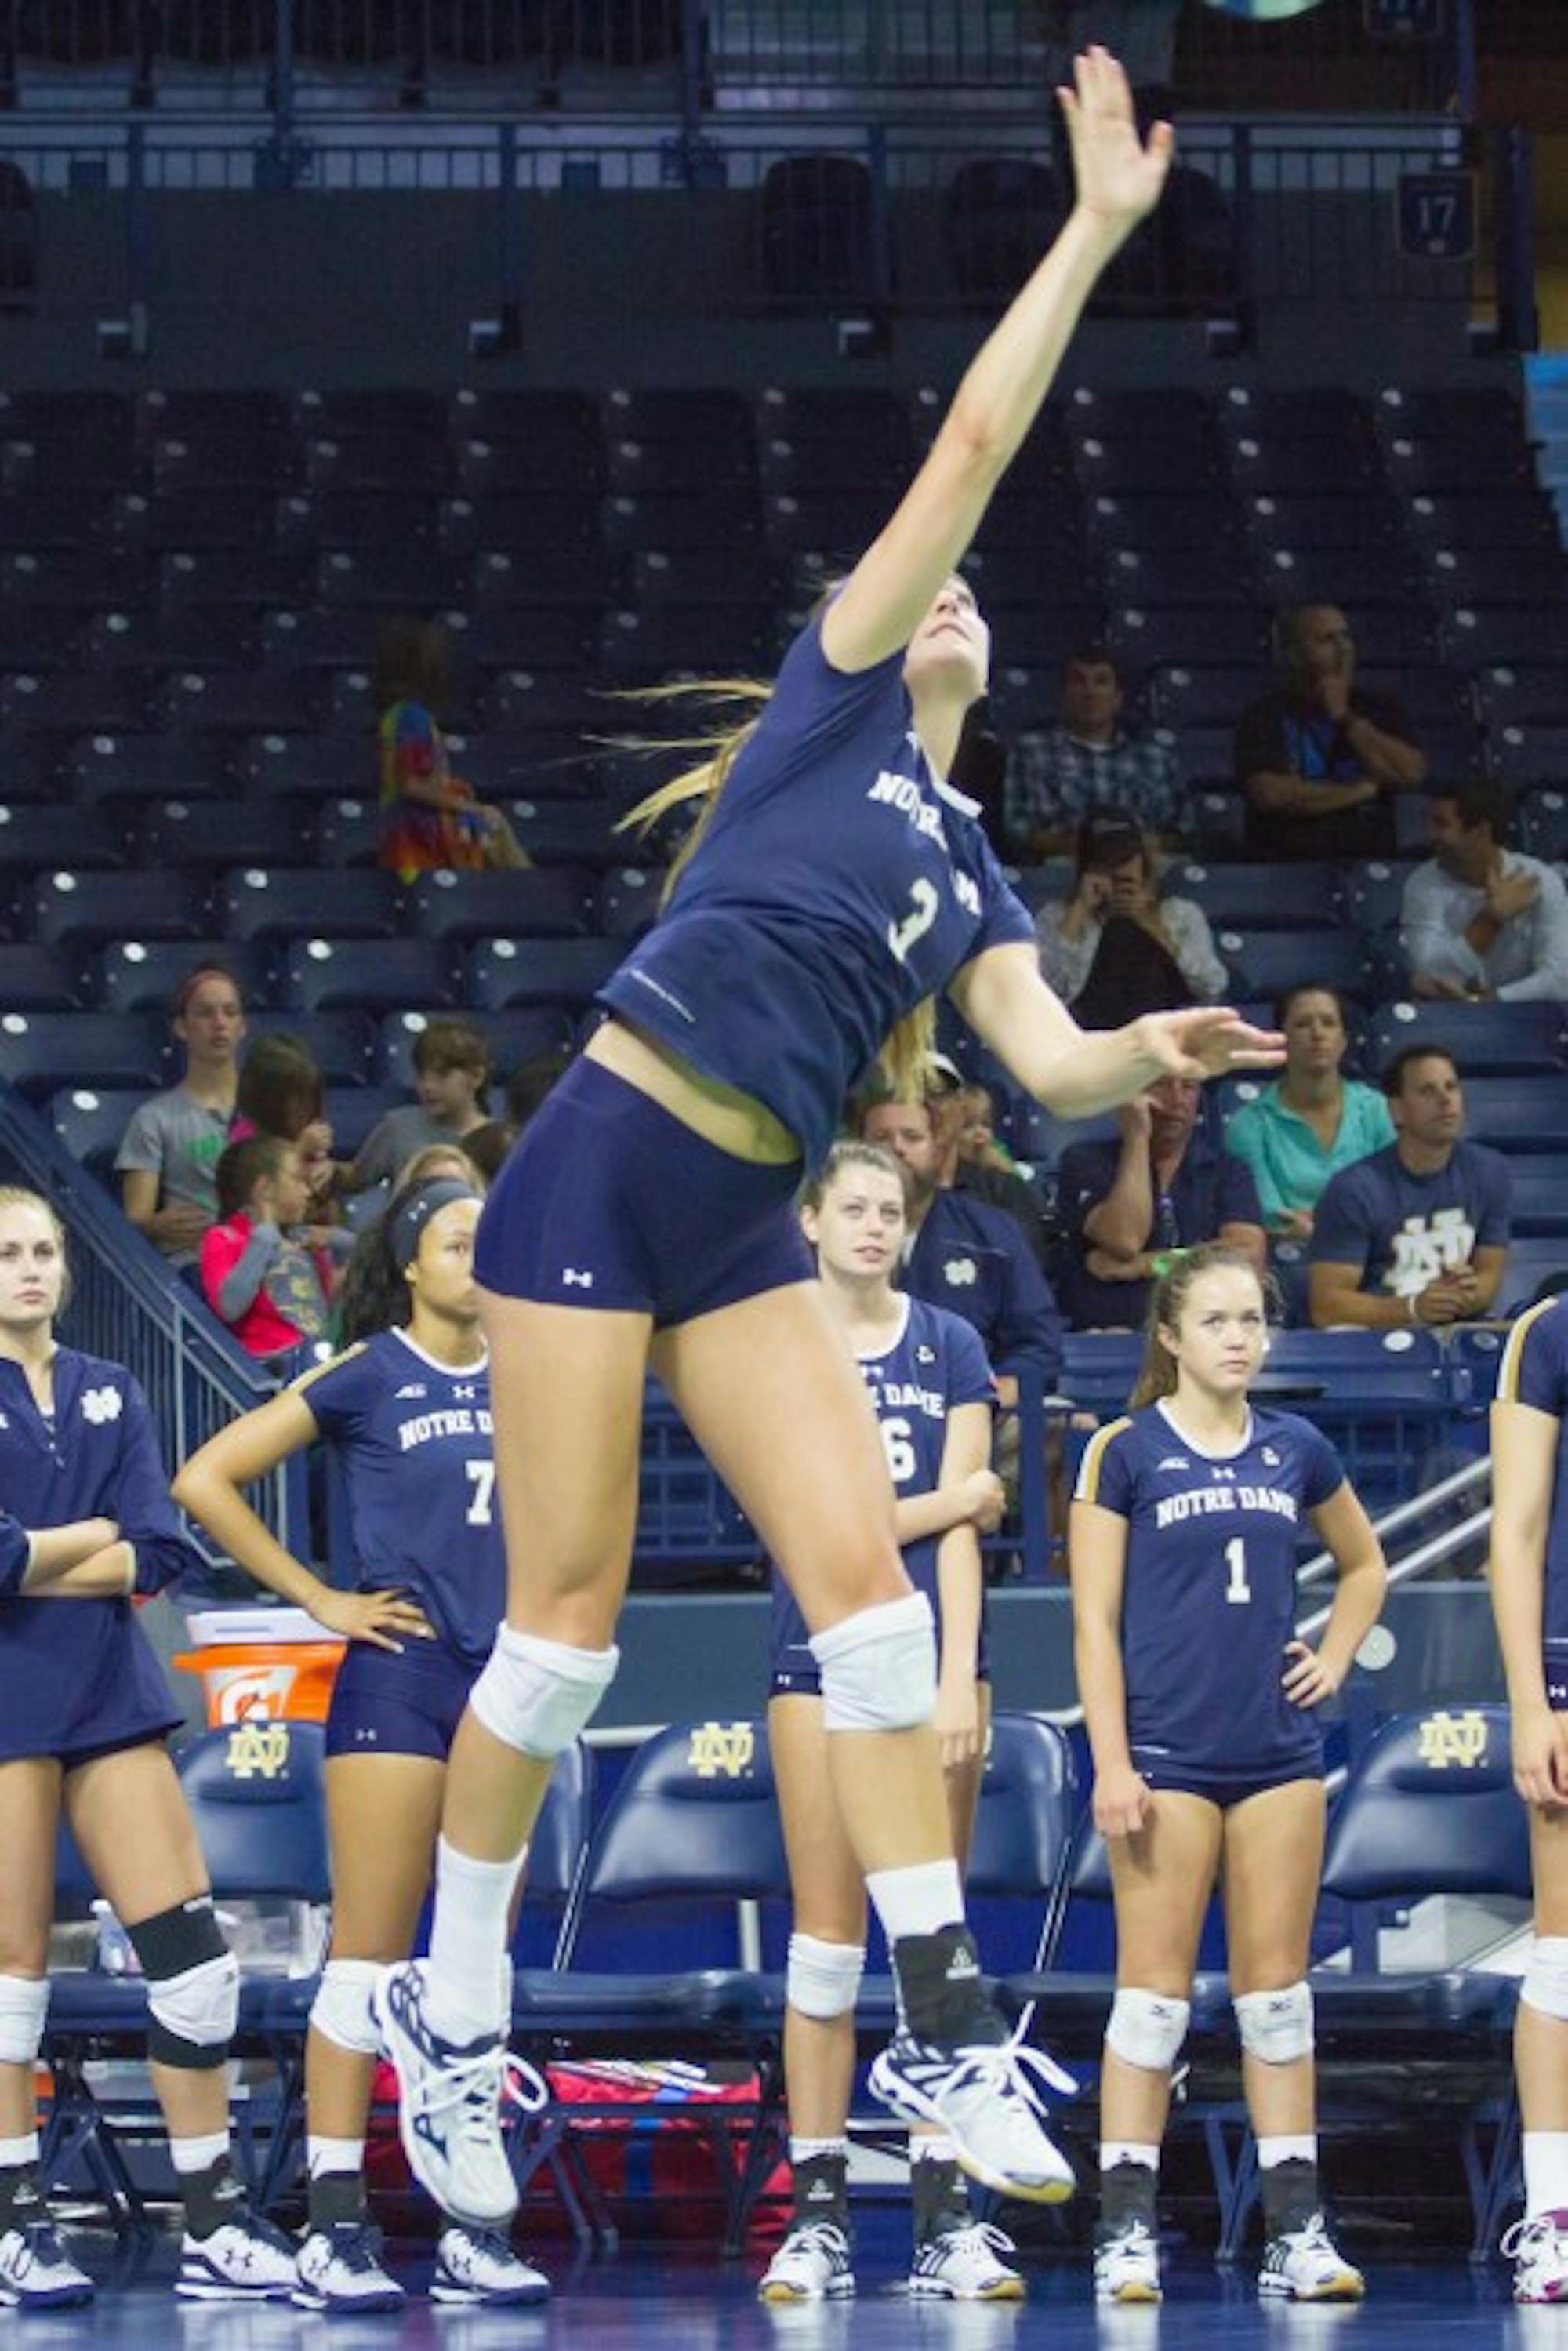 Sophomore outside hitter Sam Fry hits an overhead serve during Notre Dame’s 3-0 loss against No. 15 Florida State on Sept. 27 at the Purcell Pavilion. Fry recorded six kills along with a serving ace.